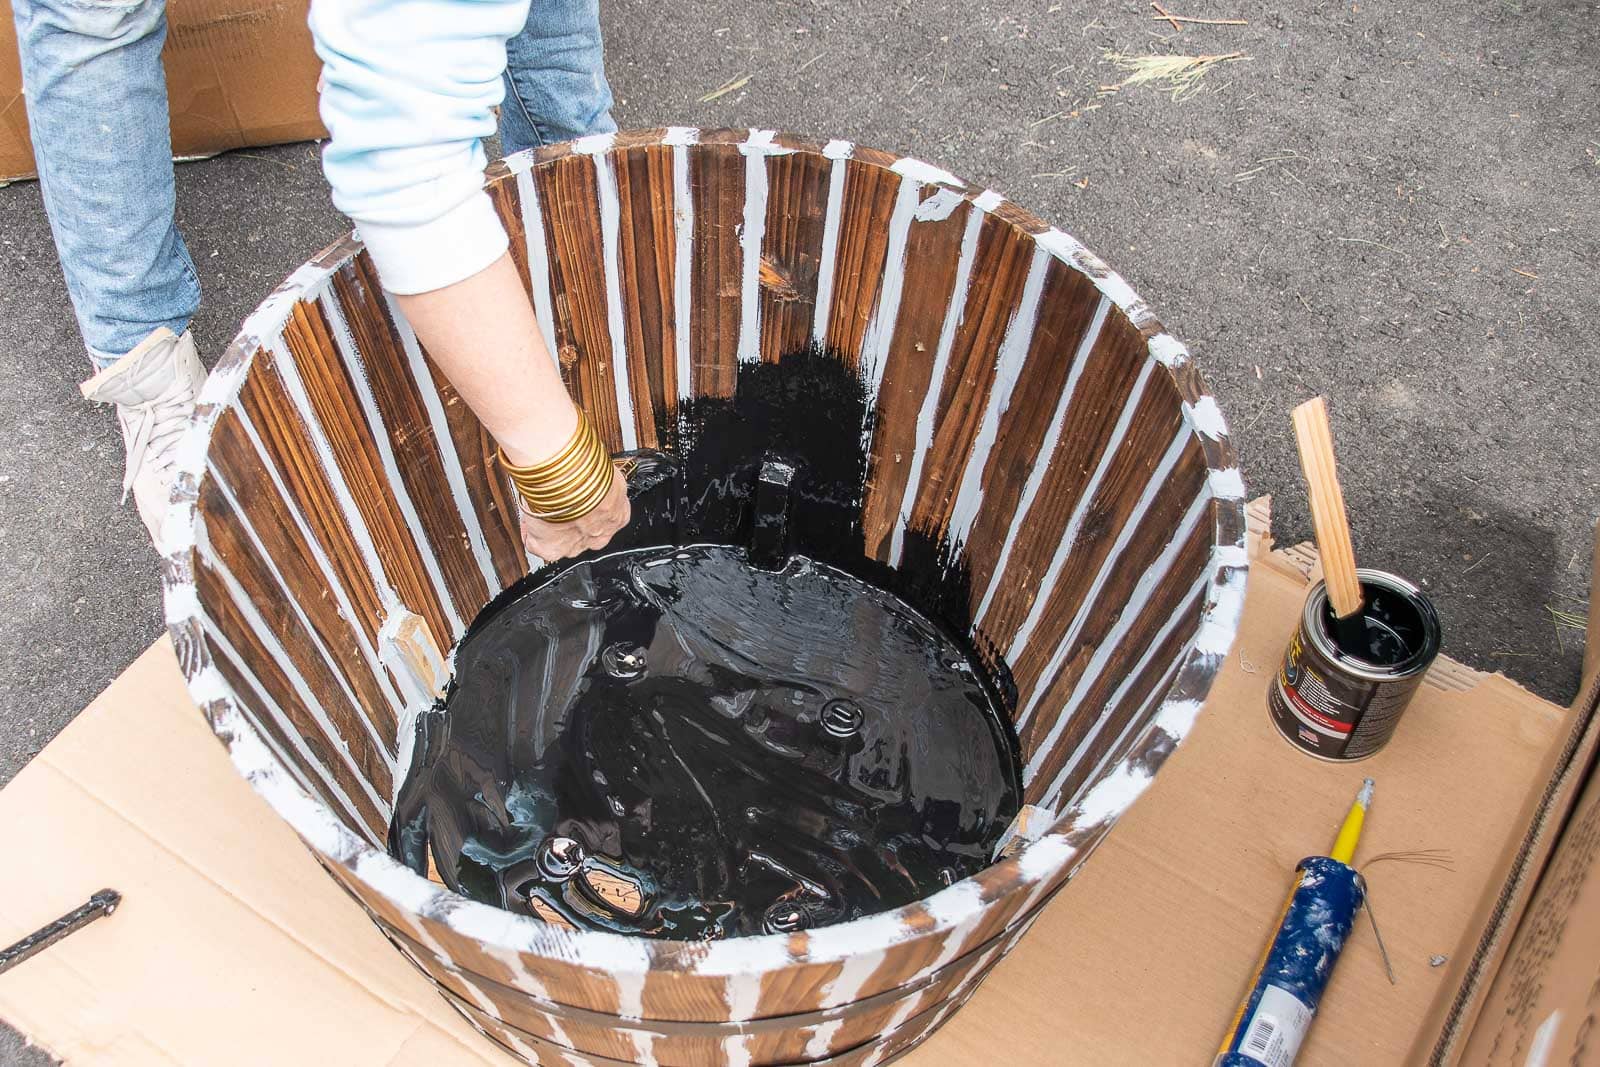 paint the inside of the barrel planter with flex sael